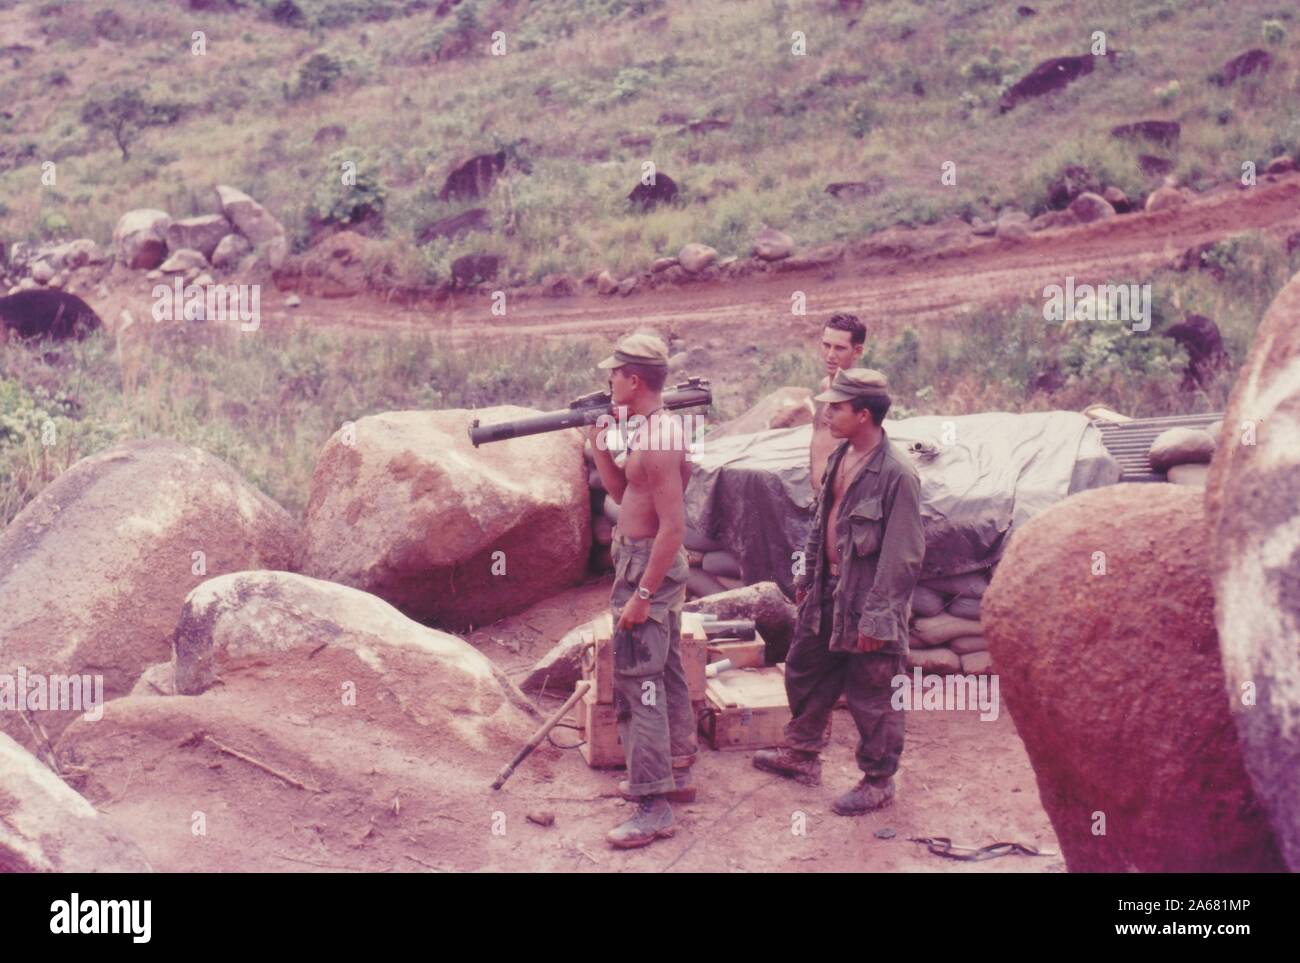 High-angle profile shot of three American servicemen, one with a bazooka balanced on his shoulder, standing outside in a rural area near boulders and sandbags, Vietnam, 1965. () Stock Photo